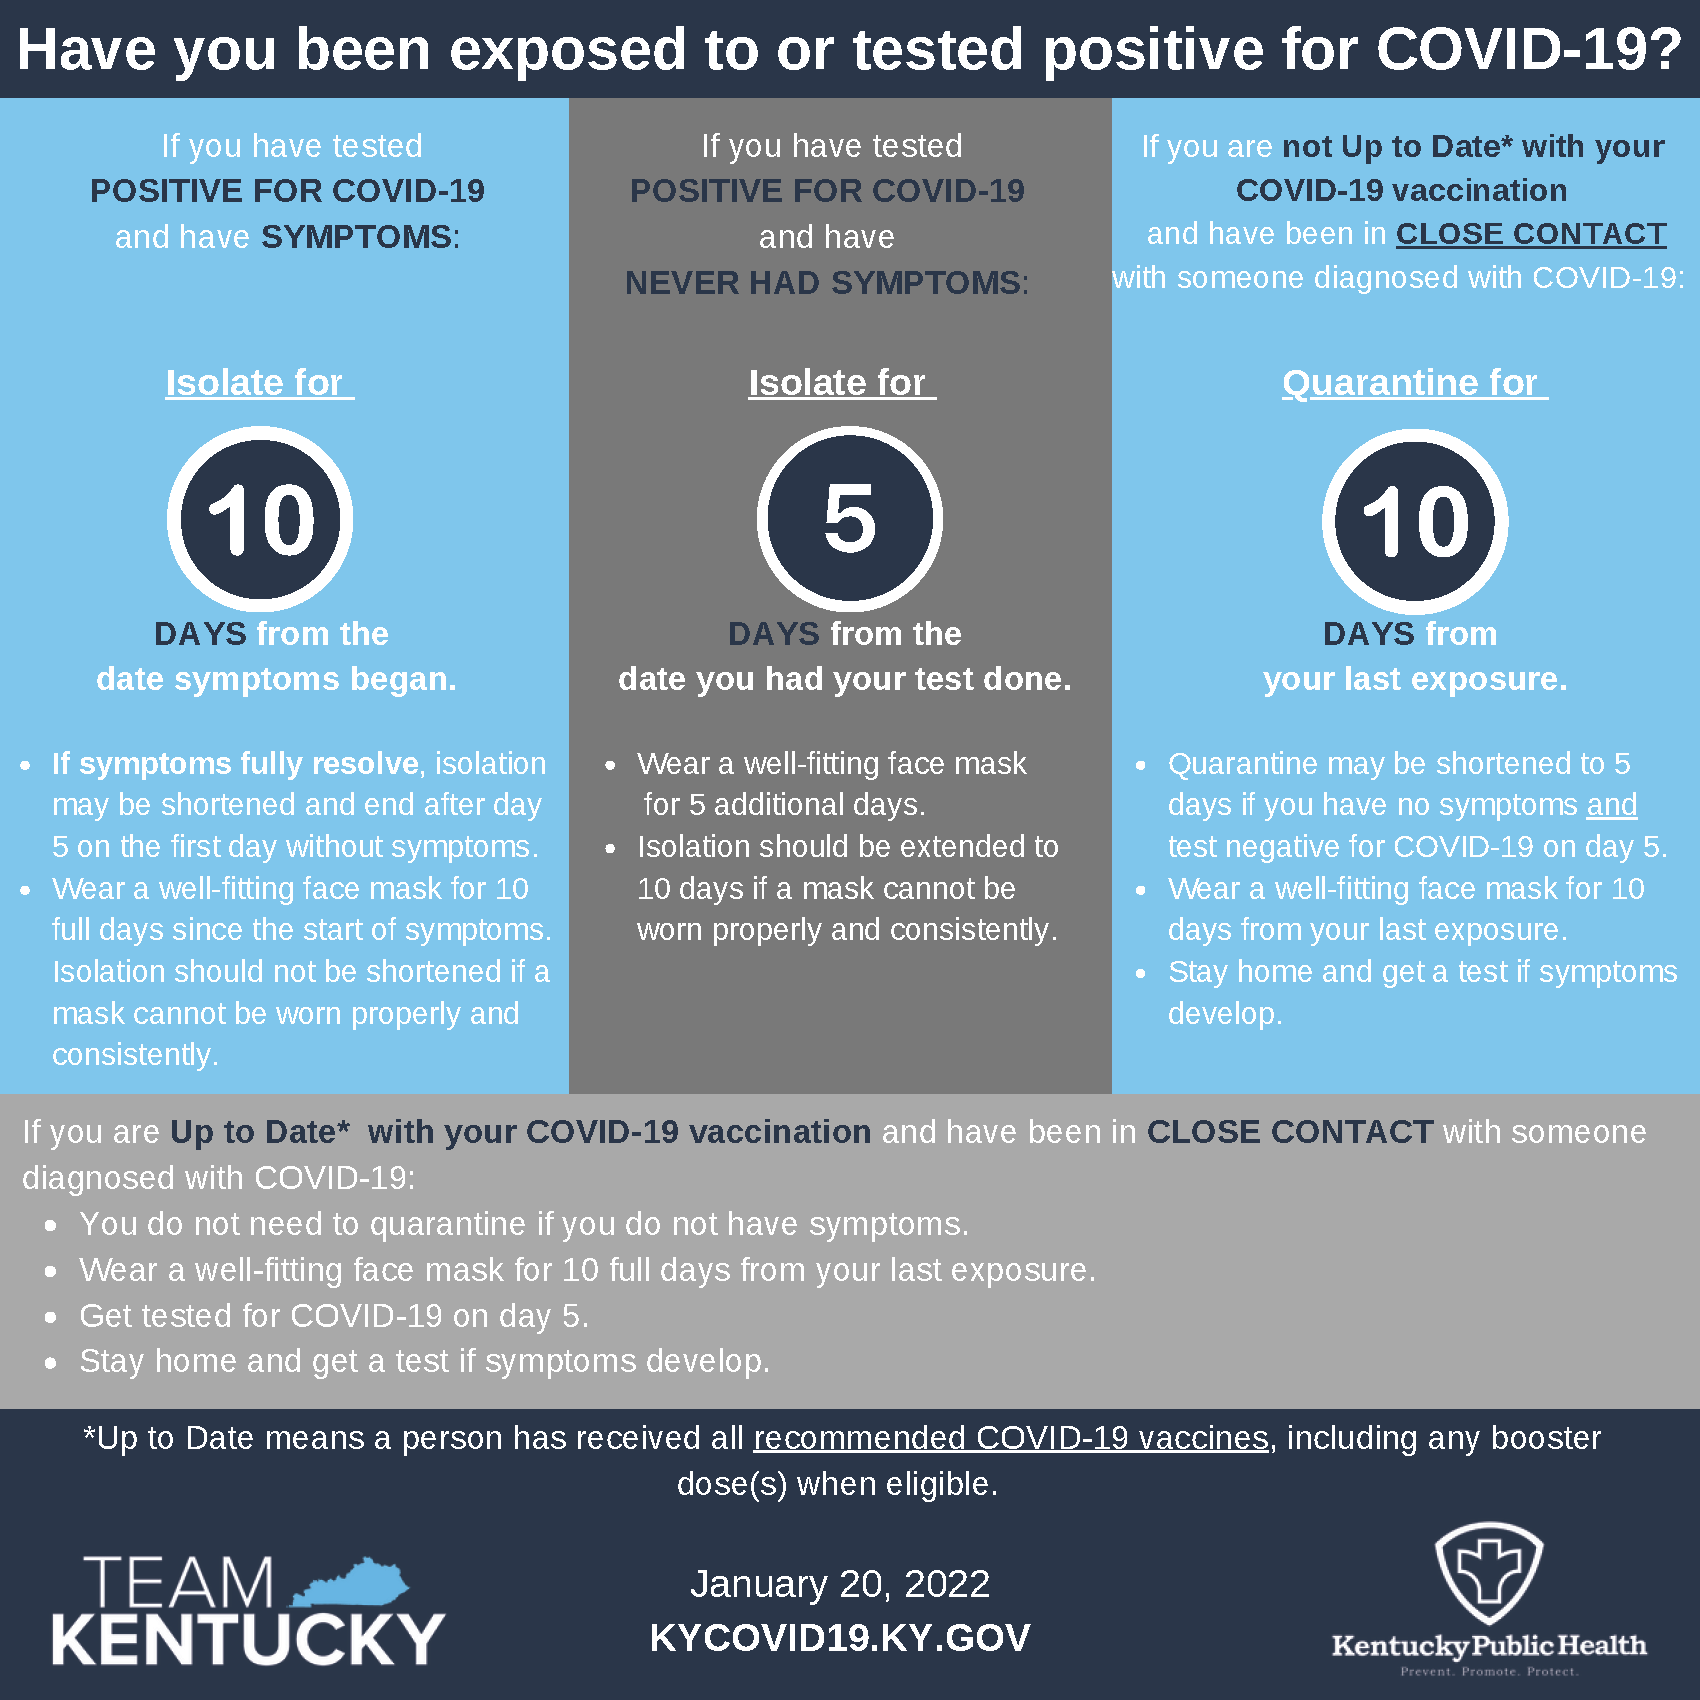 Have you been exposedto or tested positive from COVID-19? If you have tested POSITIVE FOR COVID-19 and have SYMPTOMS: Isolate for 10 DAYS from the date symptoms began. If you have tested POSITIVE FOR COVID-19 and have NEVER HAD SYMPTOMS: Isolate for 5 DAYS from the date you had your test done. If you are not fully vaccinated OR booster-eligible* but not yet boosted and have been in CLOSE CONTACT with someone diagnosed with COVID-19: Quarantine* for 10 DAYS from your last exposure. If you are boosted or fully-vaccinated but not yet booster-eligible* and have been in CLOSE CONTACT with someone diagnosed with COVID-19: You do not need to quarantine if you do not have symptoms. Wear a well-fitting face mask for 10 full days from your last exposure. Get tested for COVID-19 on day 5. Stay home and get a test if symptoms develop. *Booster-eligible includes people 16 years of age or older who completed their primary mRNA (Pfizer/Moderna) vaccine series greater than 6 months ago or their J&J/Janssen vaccine greater than 2 months ago.